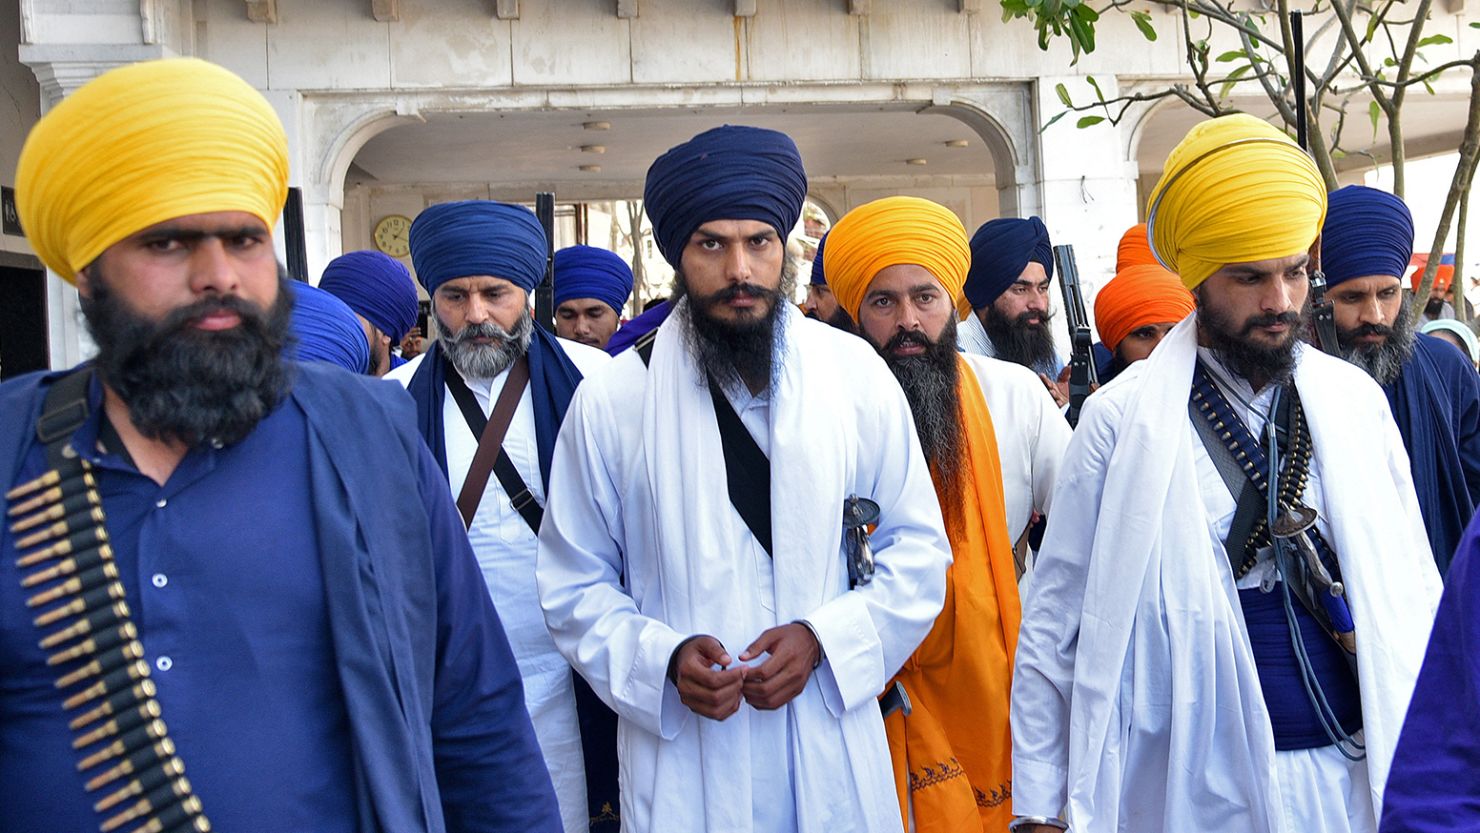 Khalistan: The outlawed Sikh separatist movement that has Indian